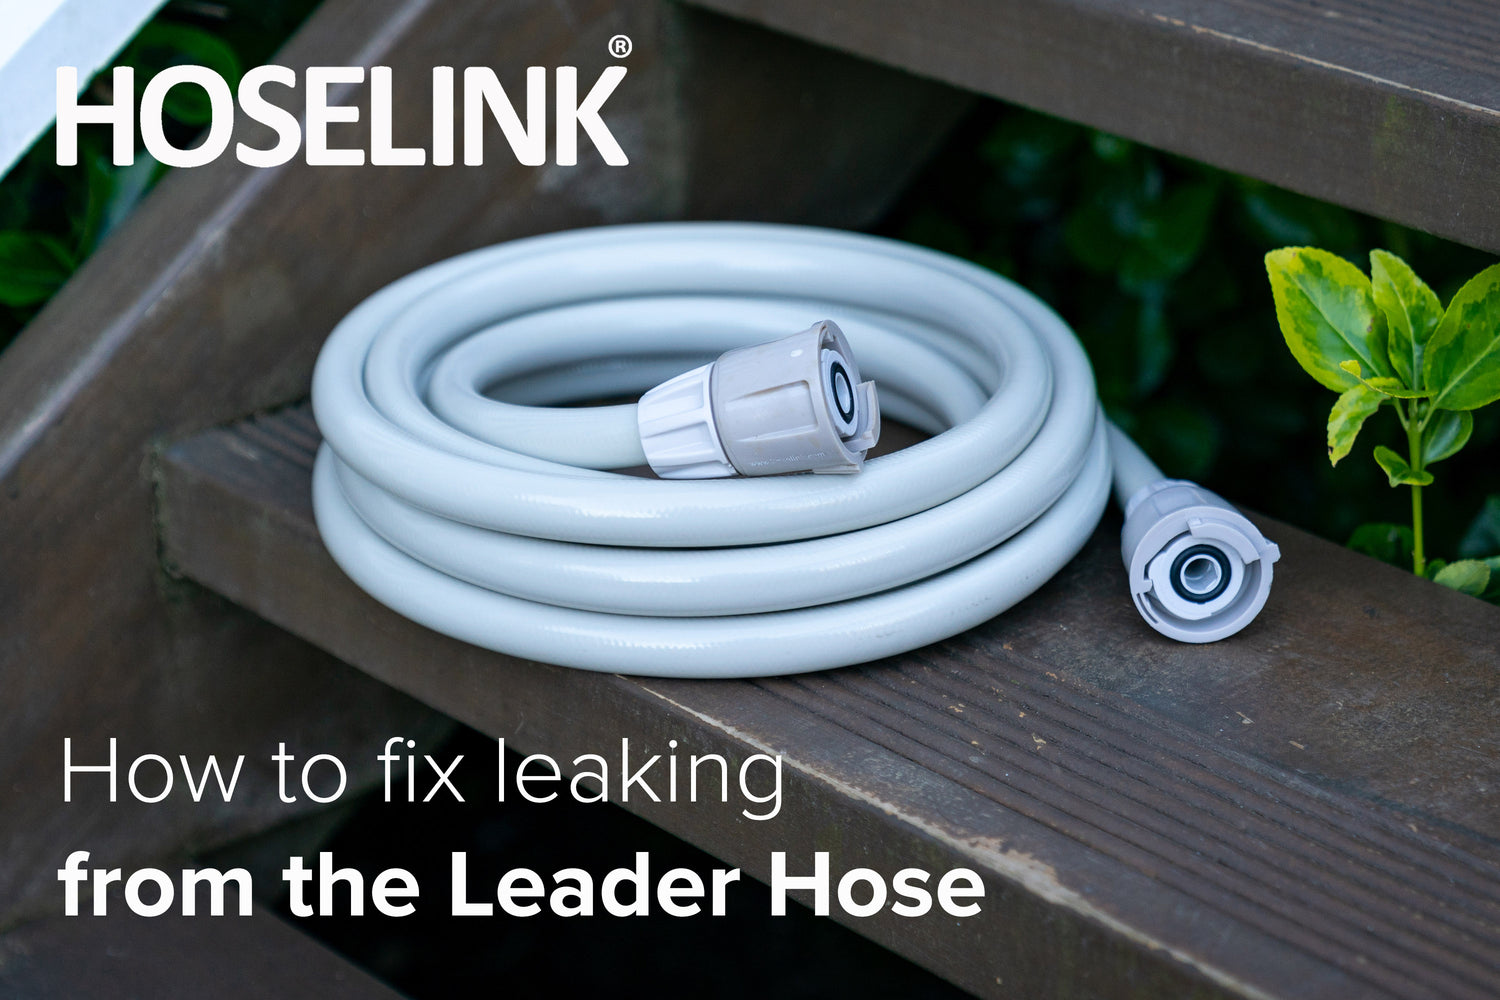 How to Fix Leaking from the Leader Hose